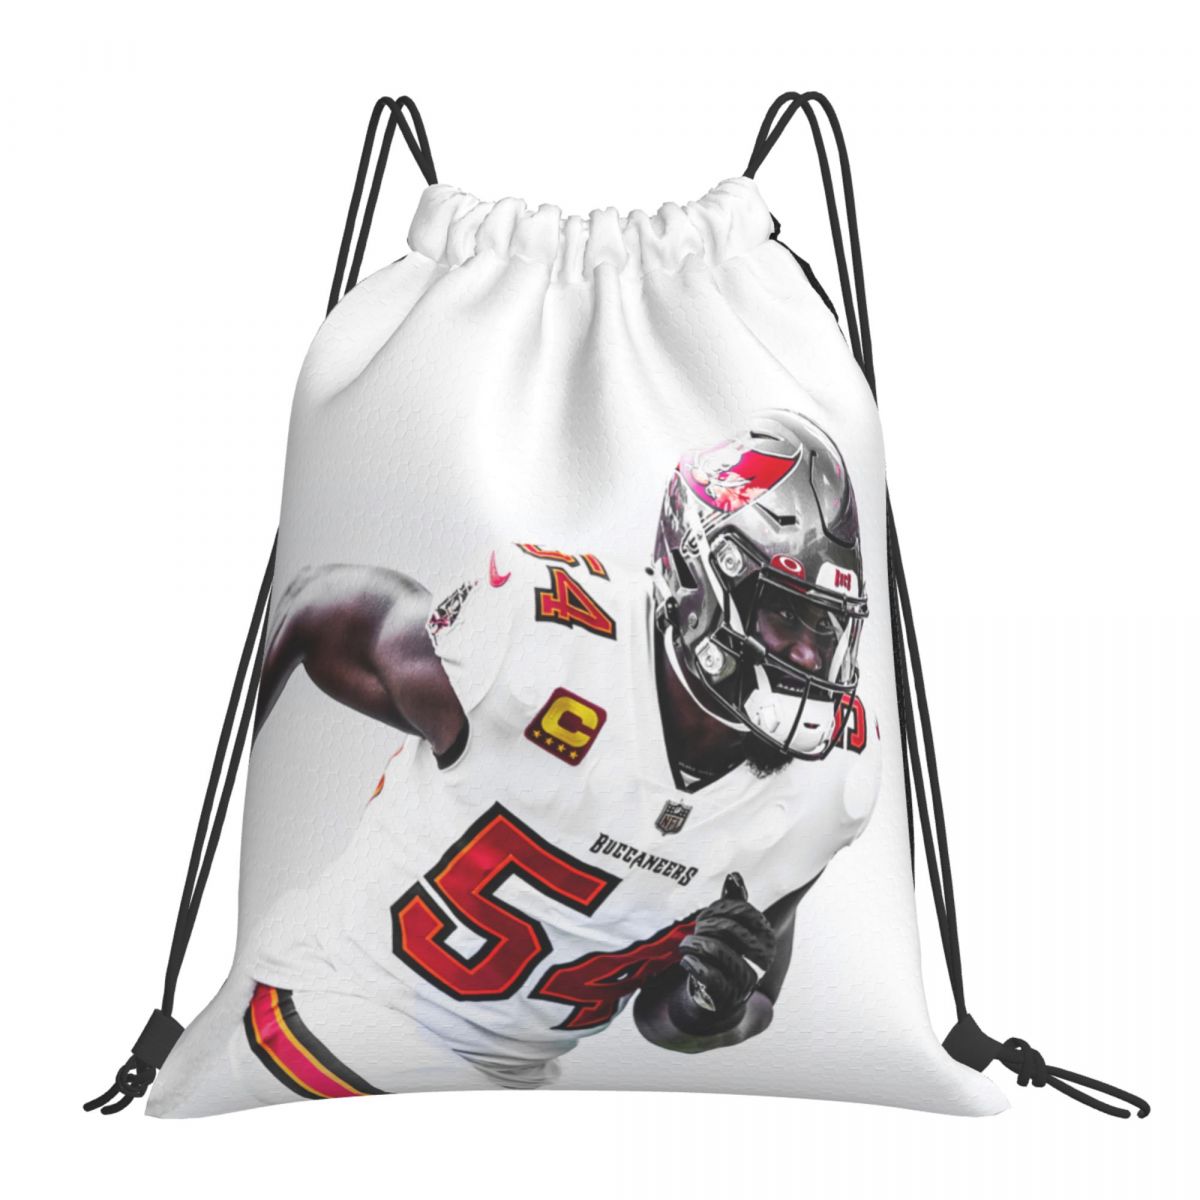 Tampa Bay Buccaneers Lavonte David Drawstring Bags for School Gym